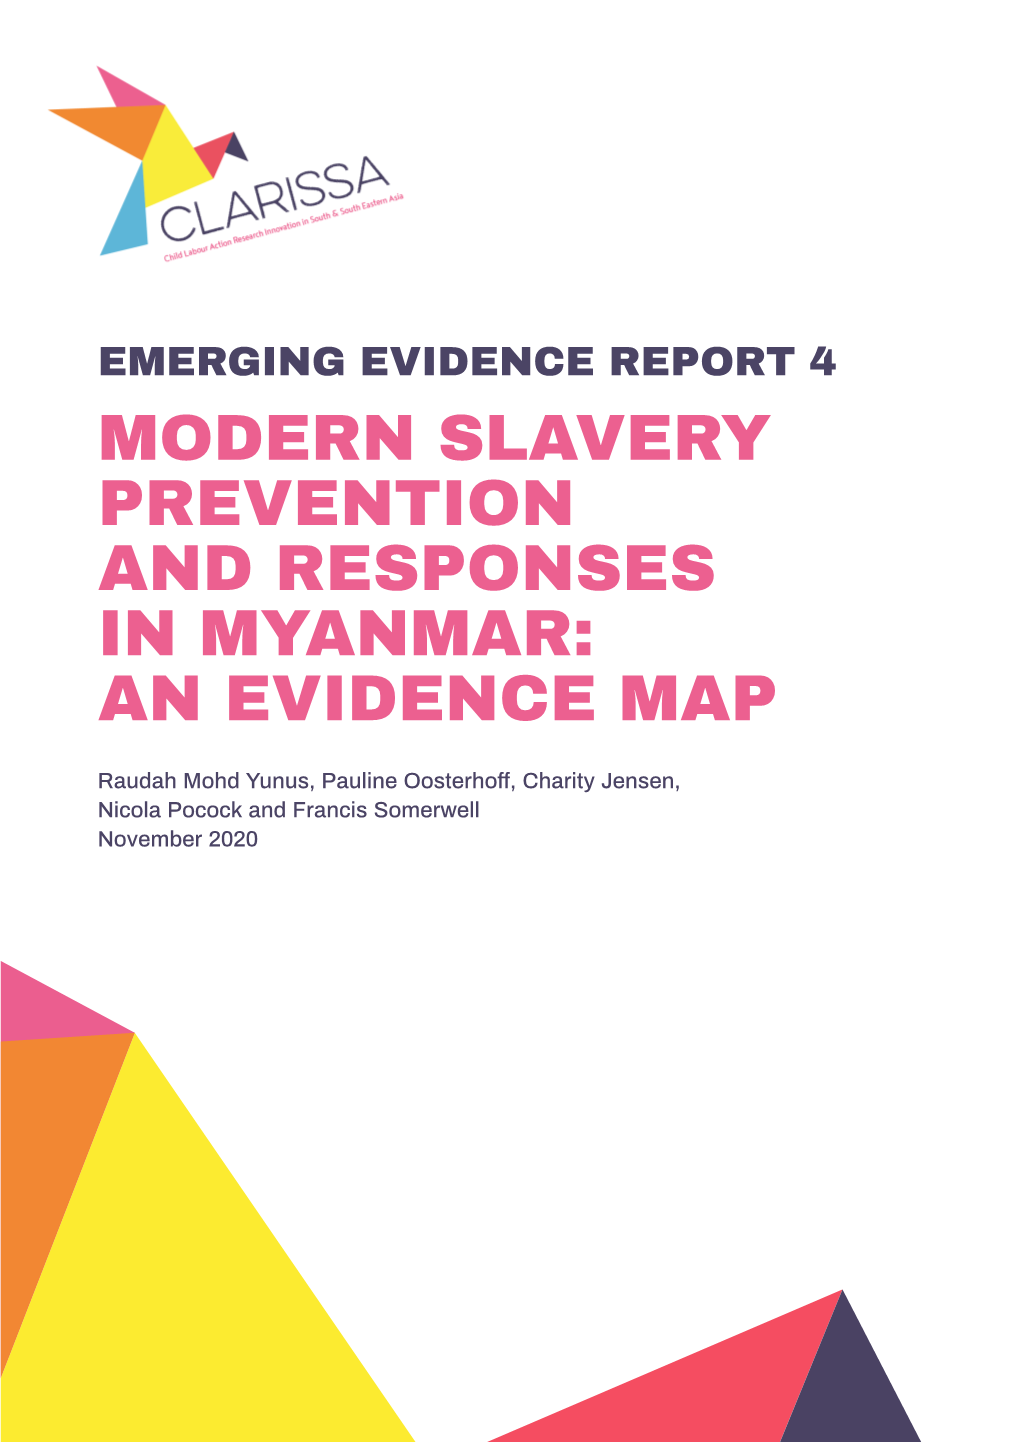 Modern Slavery Prevention and Responses in Myanmar: an Evidence Map